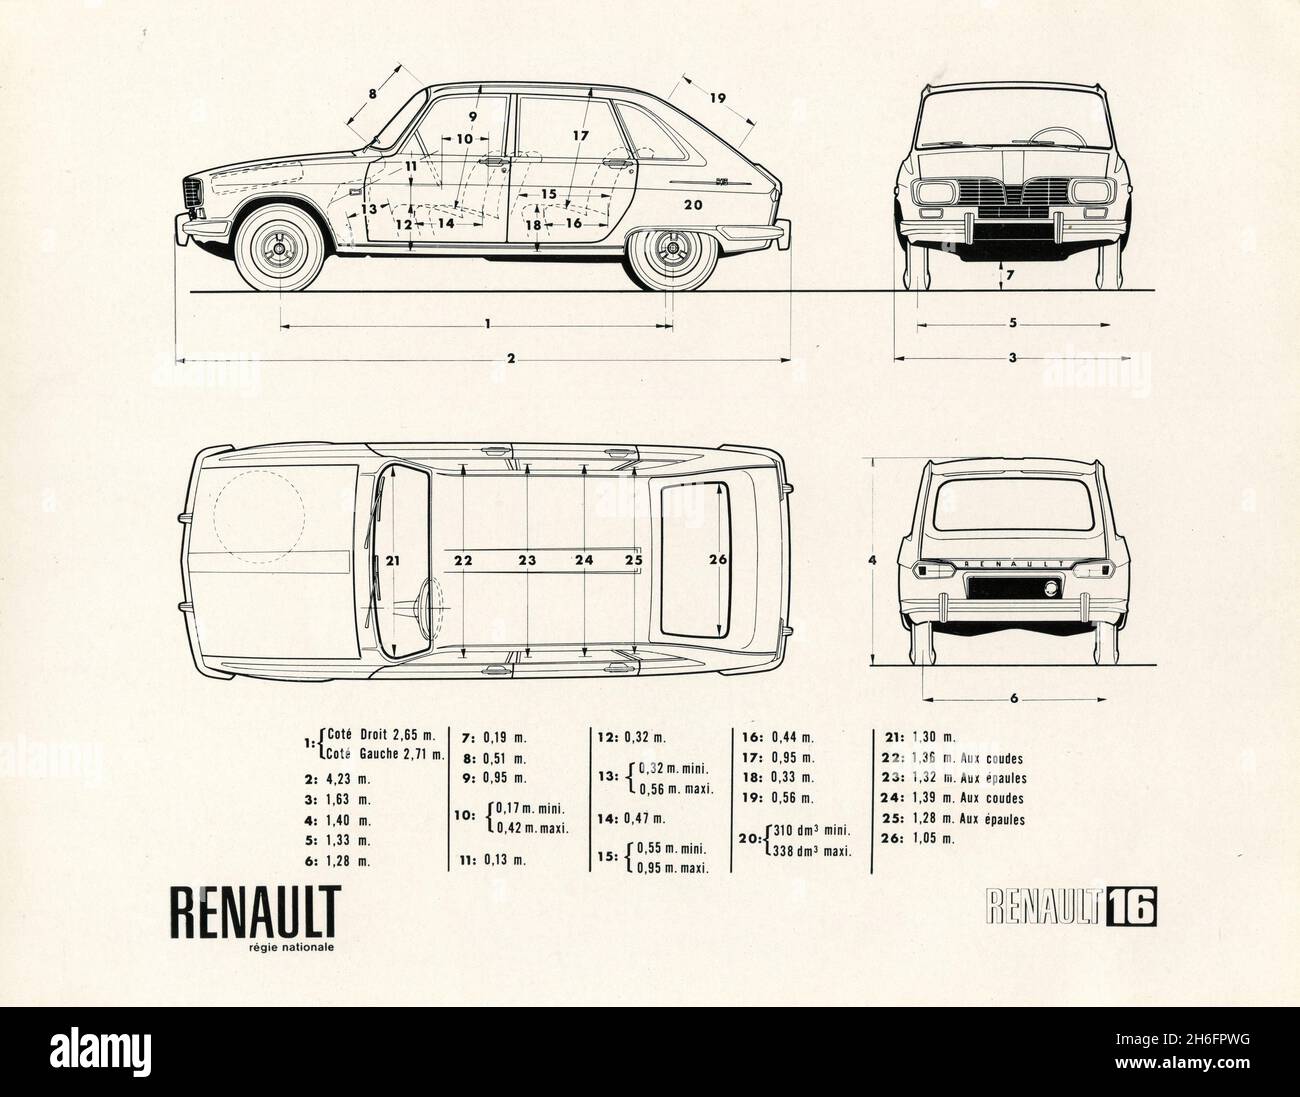 Drawings and measures of the Renault 16 car, France 1965 Stock Photo